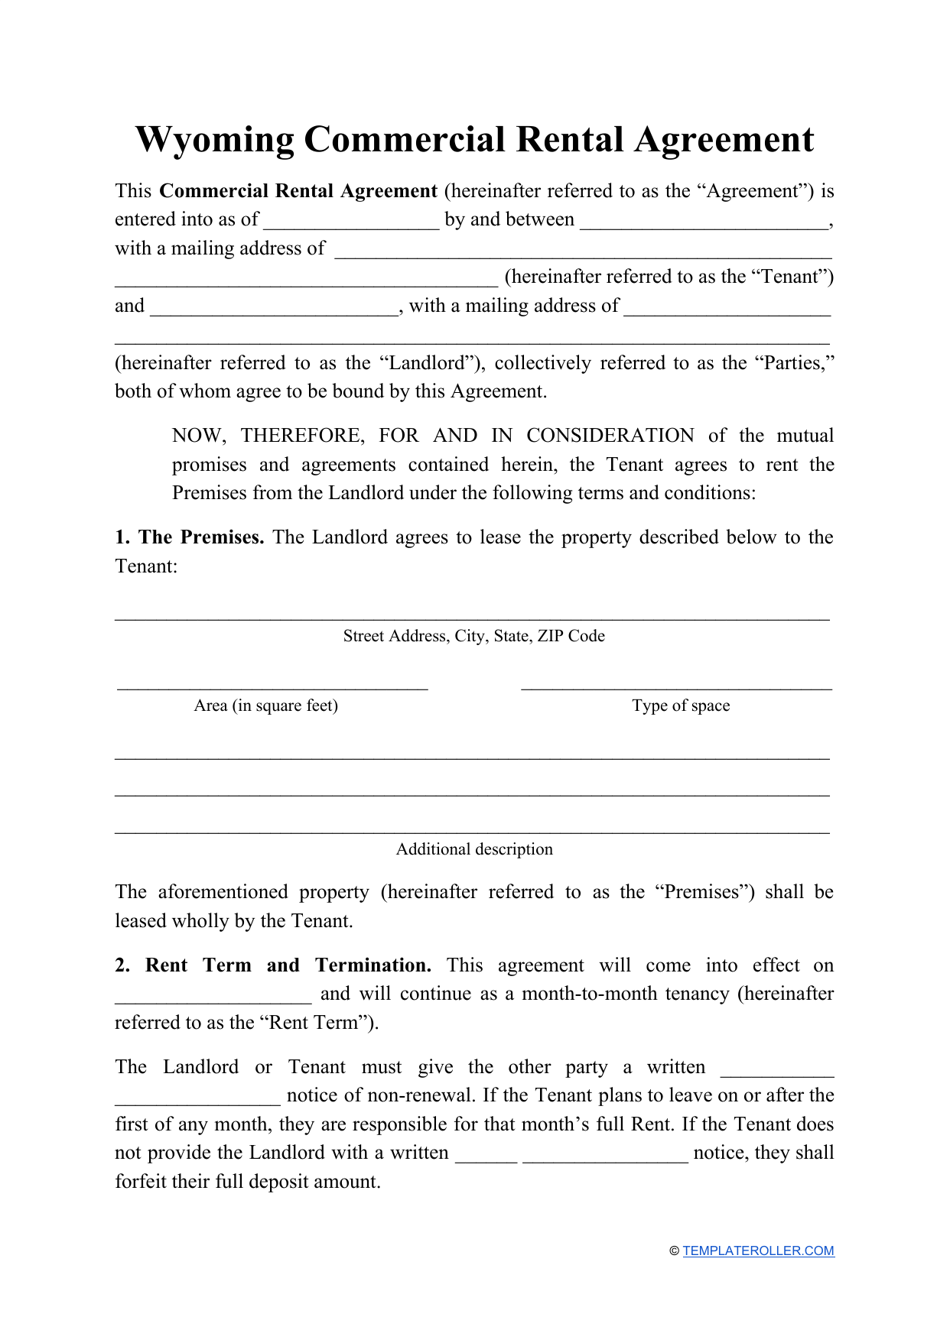 Commercial Rental Agreement Template - Wyoming, Page 1